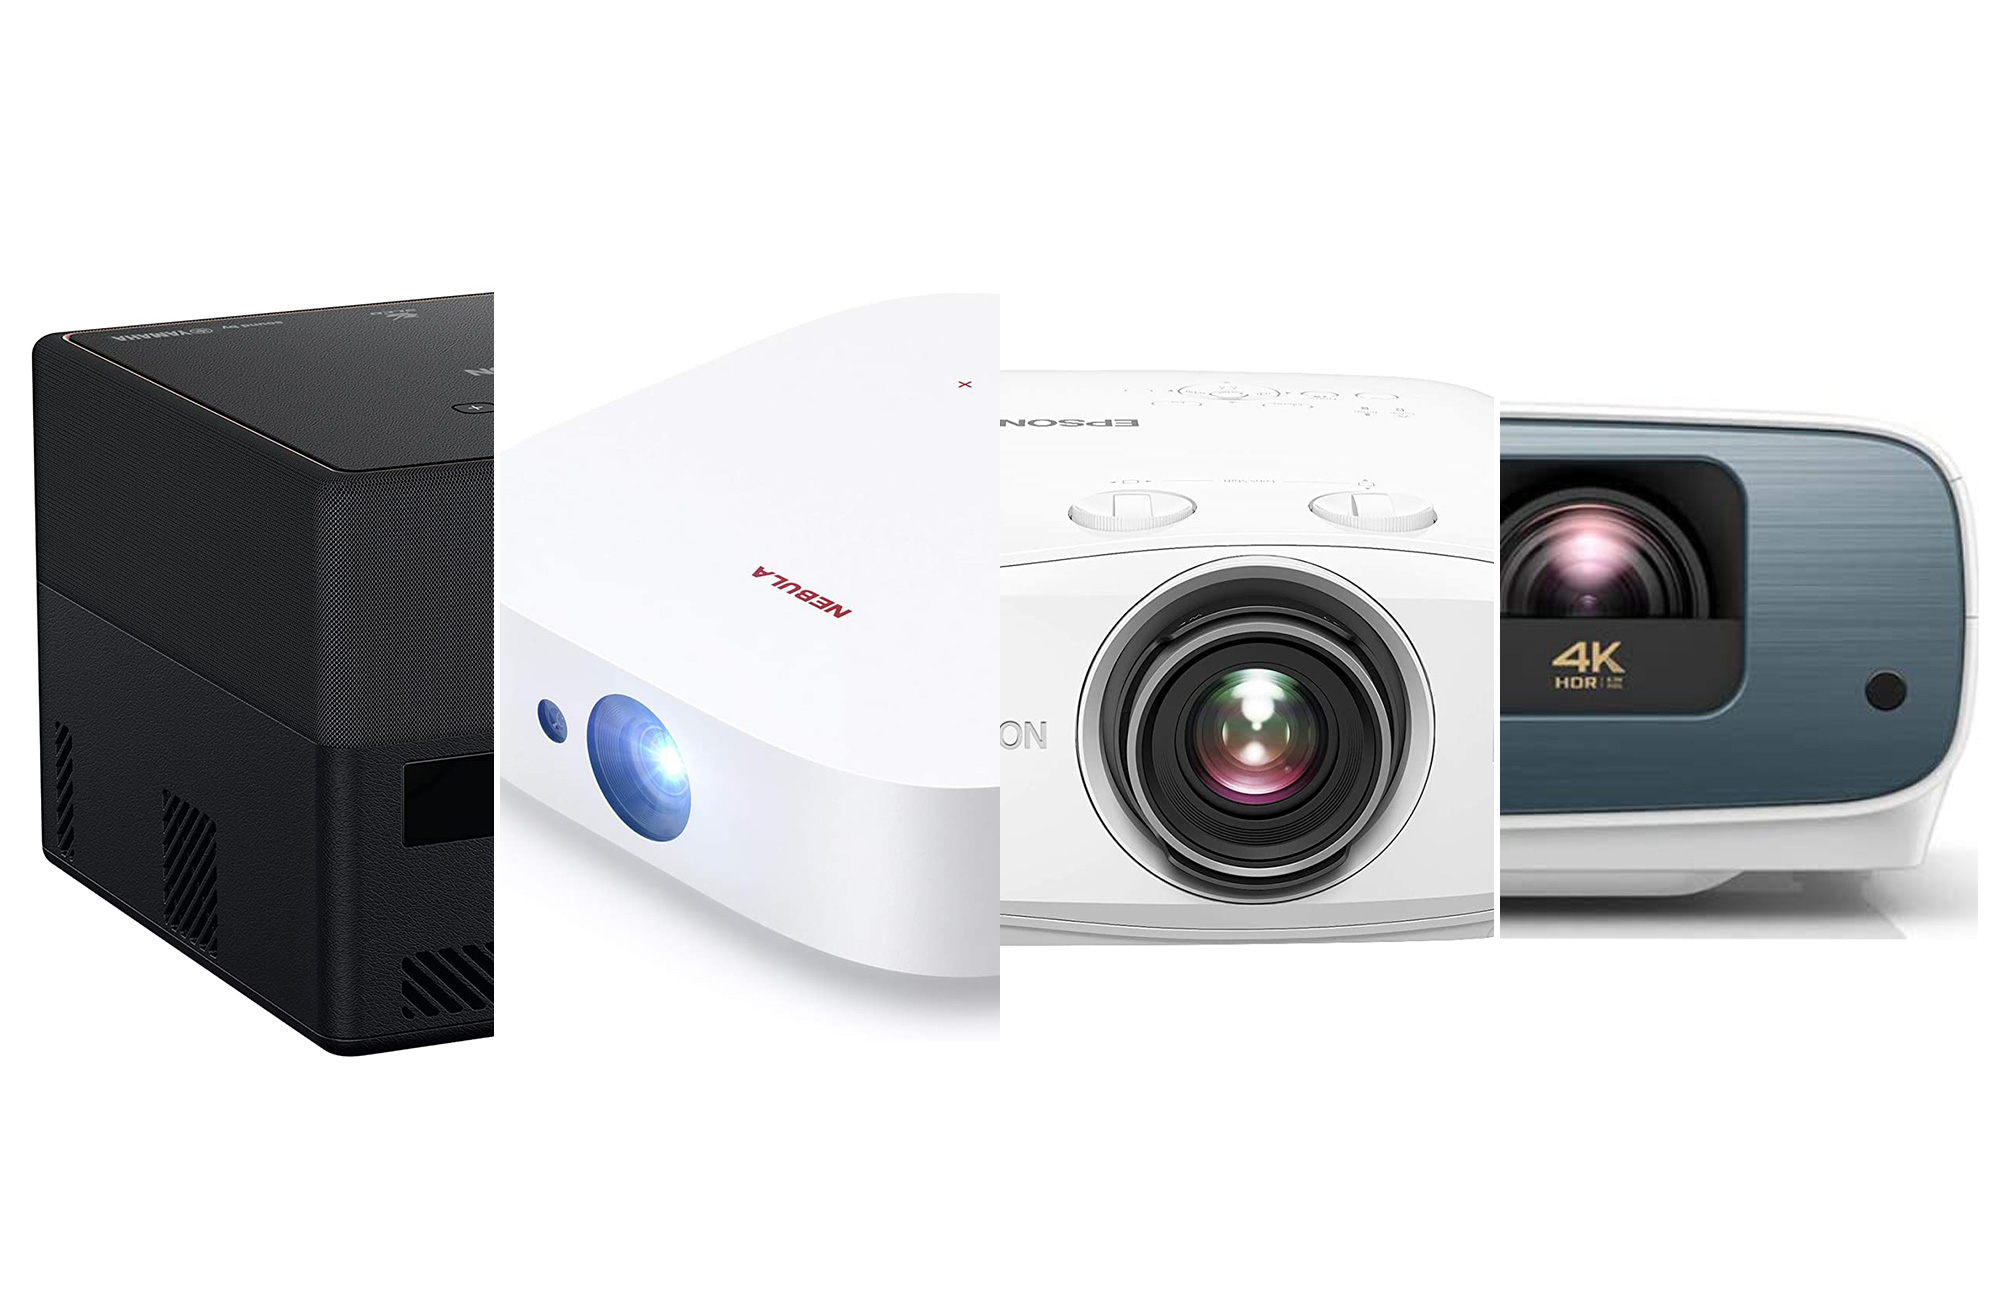 The Best Portable 4k Projector for Movies